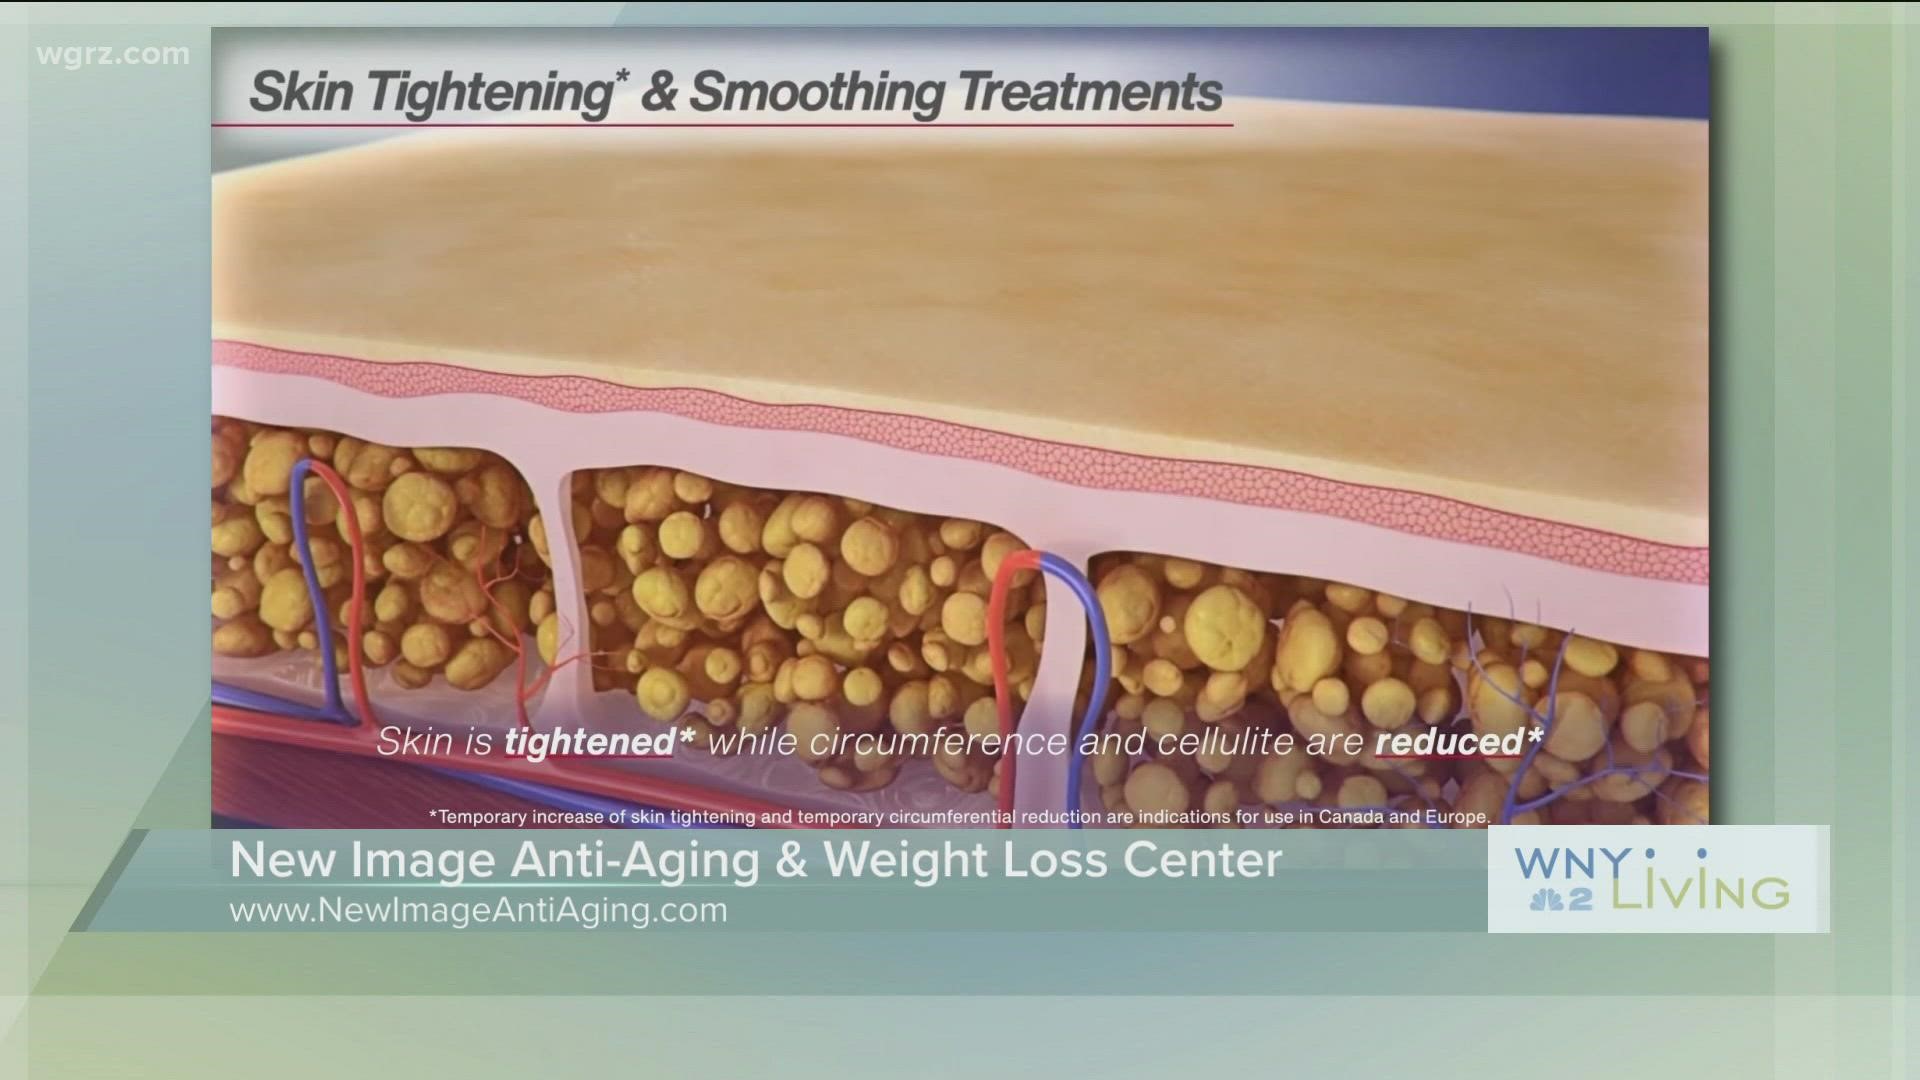 WNY Living - July 9 - New Image Anti-Aging & Weight Loss Center (THIS VIDEO IS SPONSORED BY NEW IMAGE ANTI-AGING & WEIGHT LOSS CENTER)